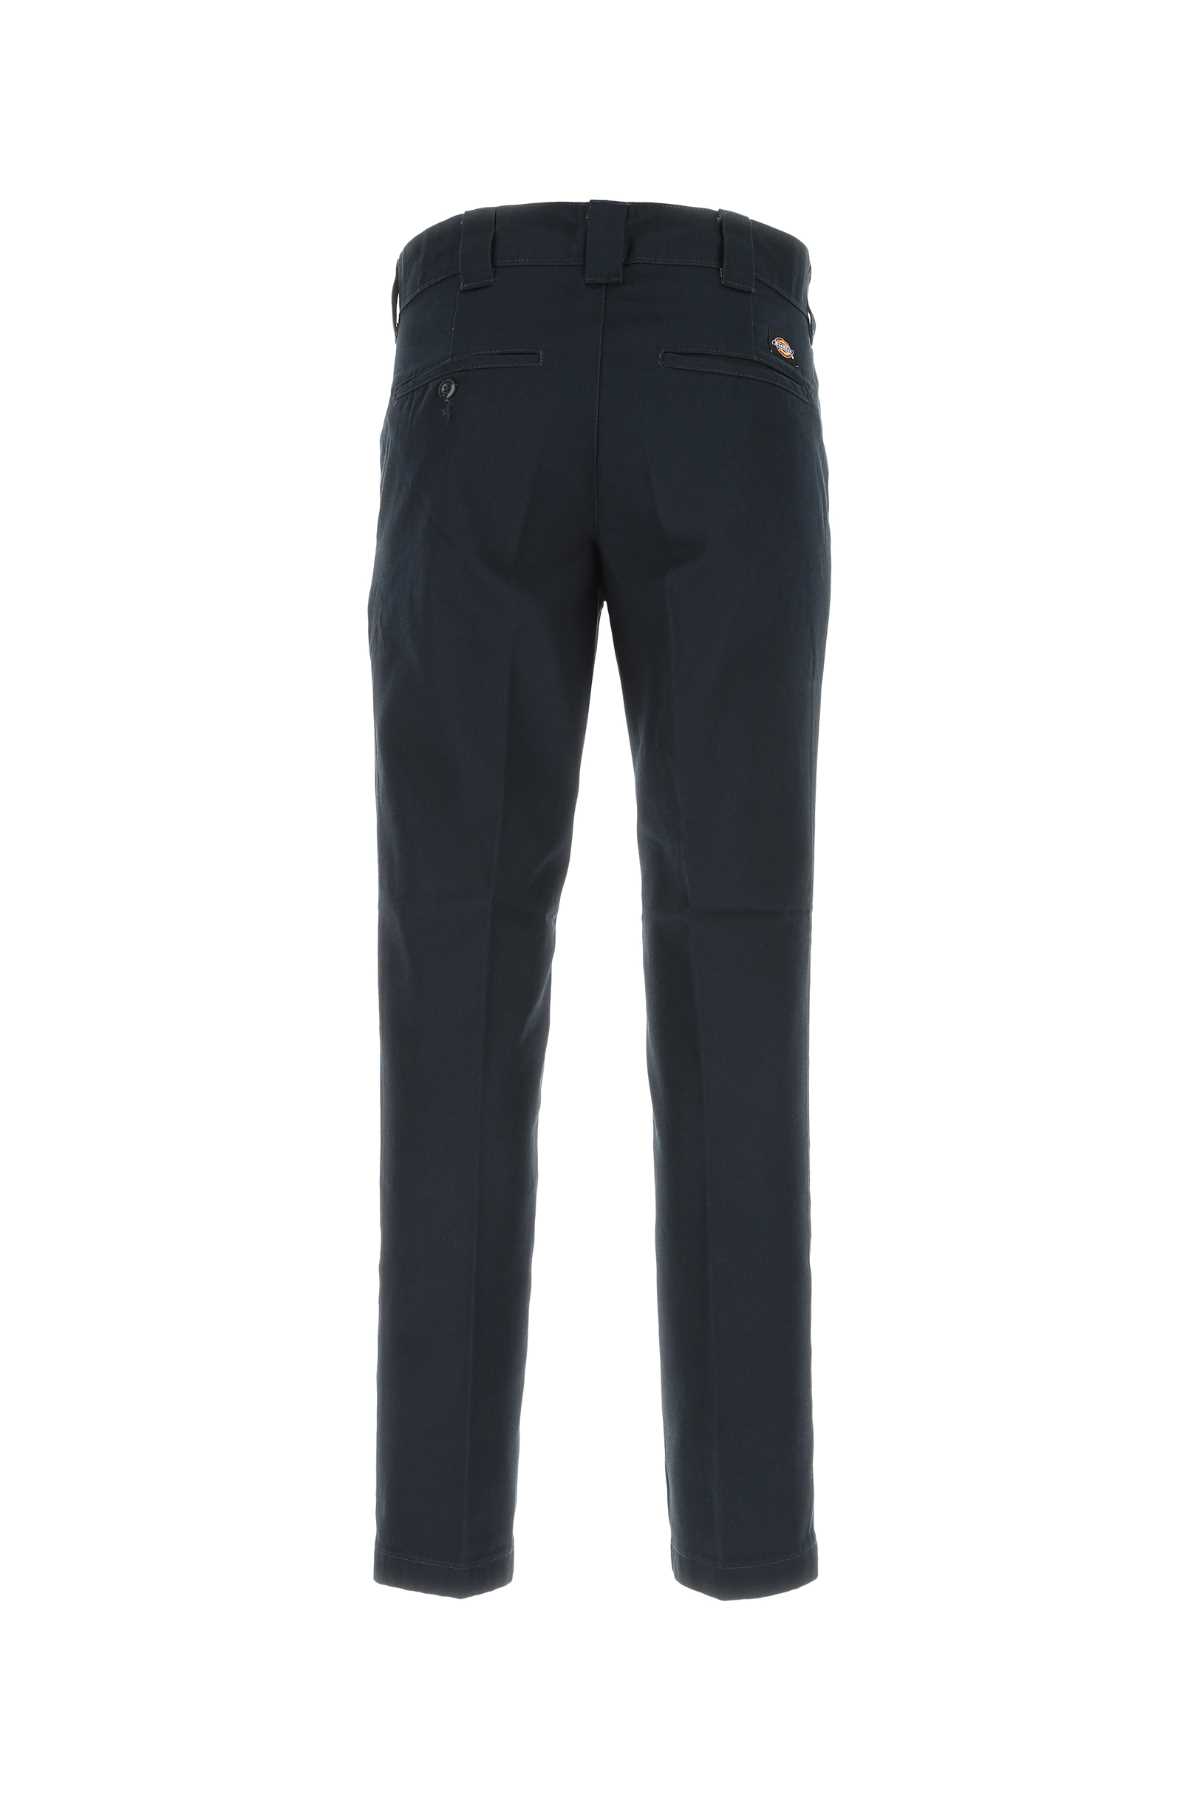 Dickies Midnight Blue Polyester Blend Pant In Dnx1